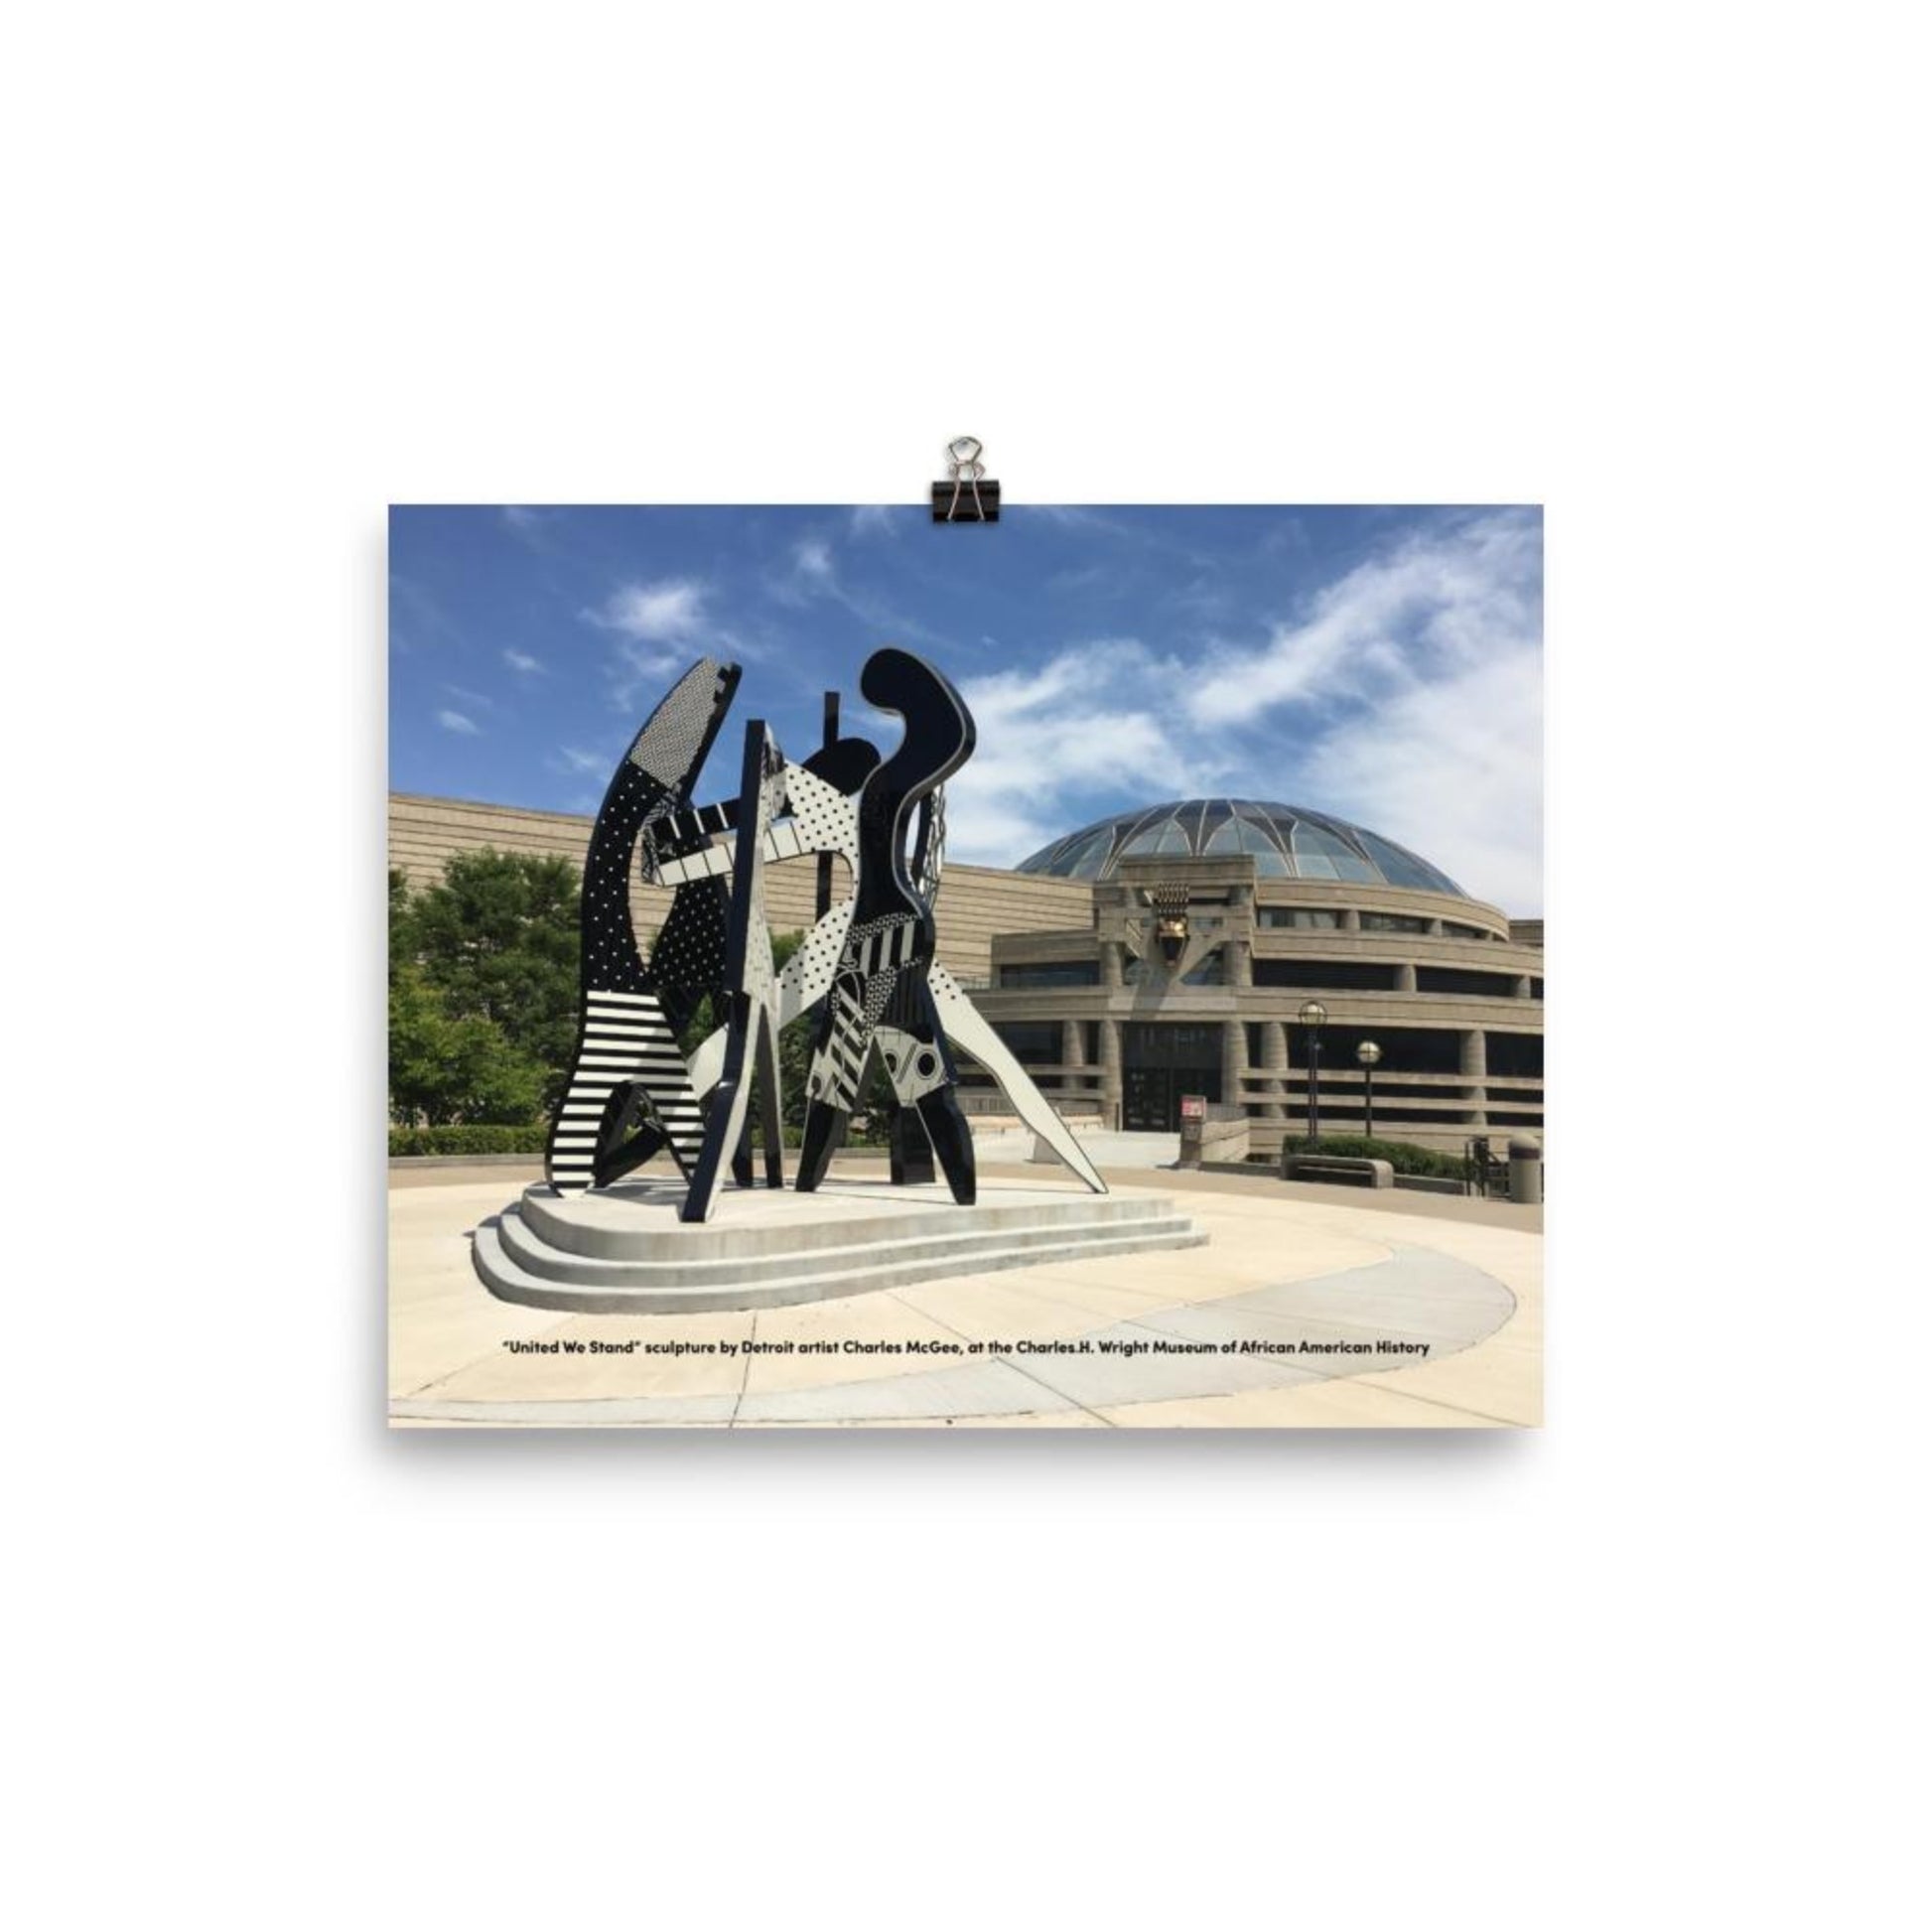 8 inch by 10 inch poster with United We Stand sculpture in front of Charles H. Wright Museum of African American History